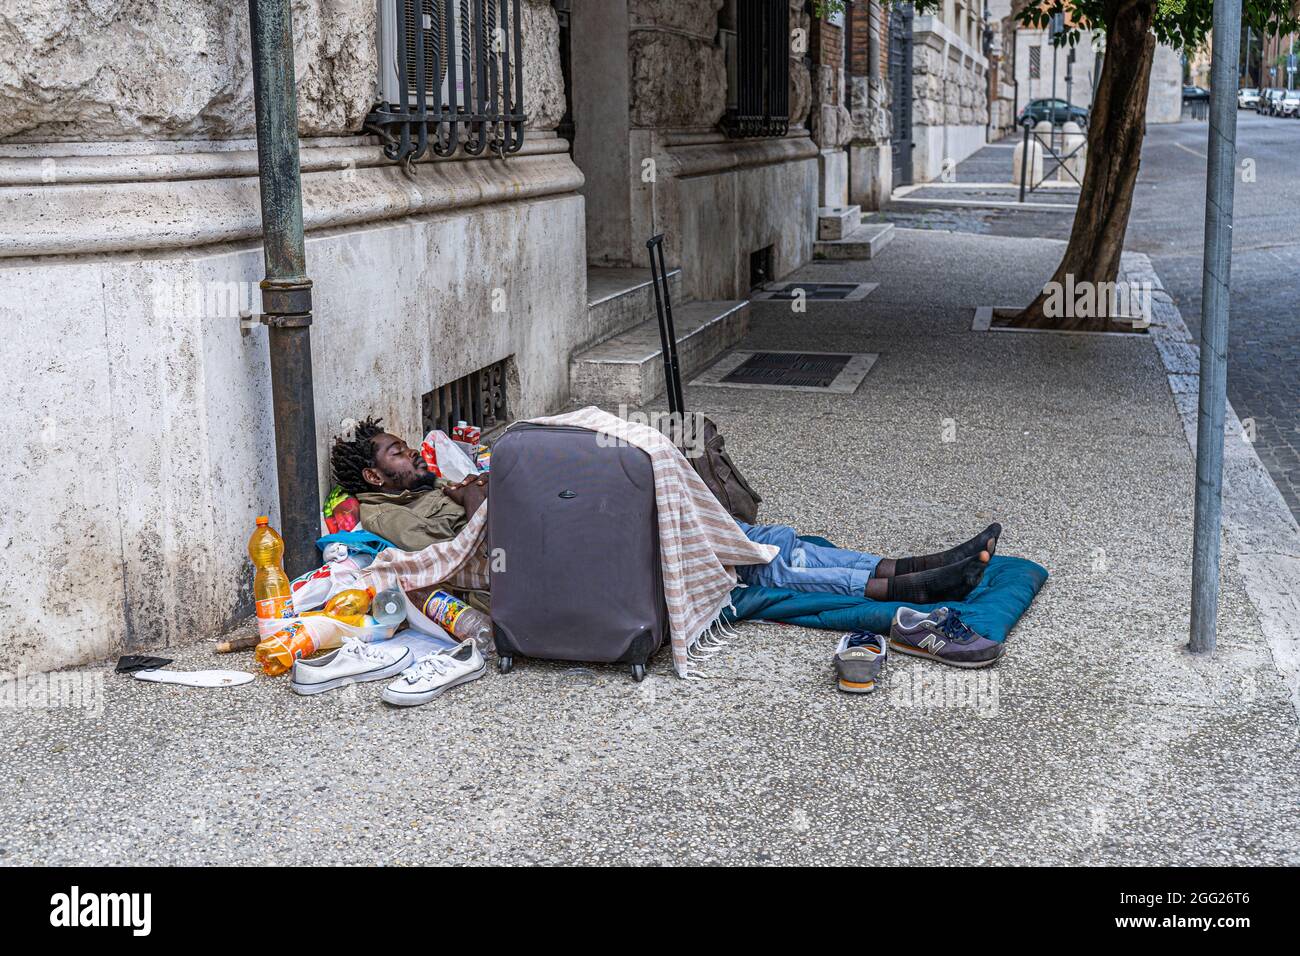 Rome Italy Uk 28 August 2021 A Homeless Man Sleeps Half Naked In A Residential District Of